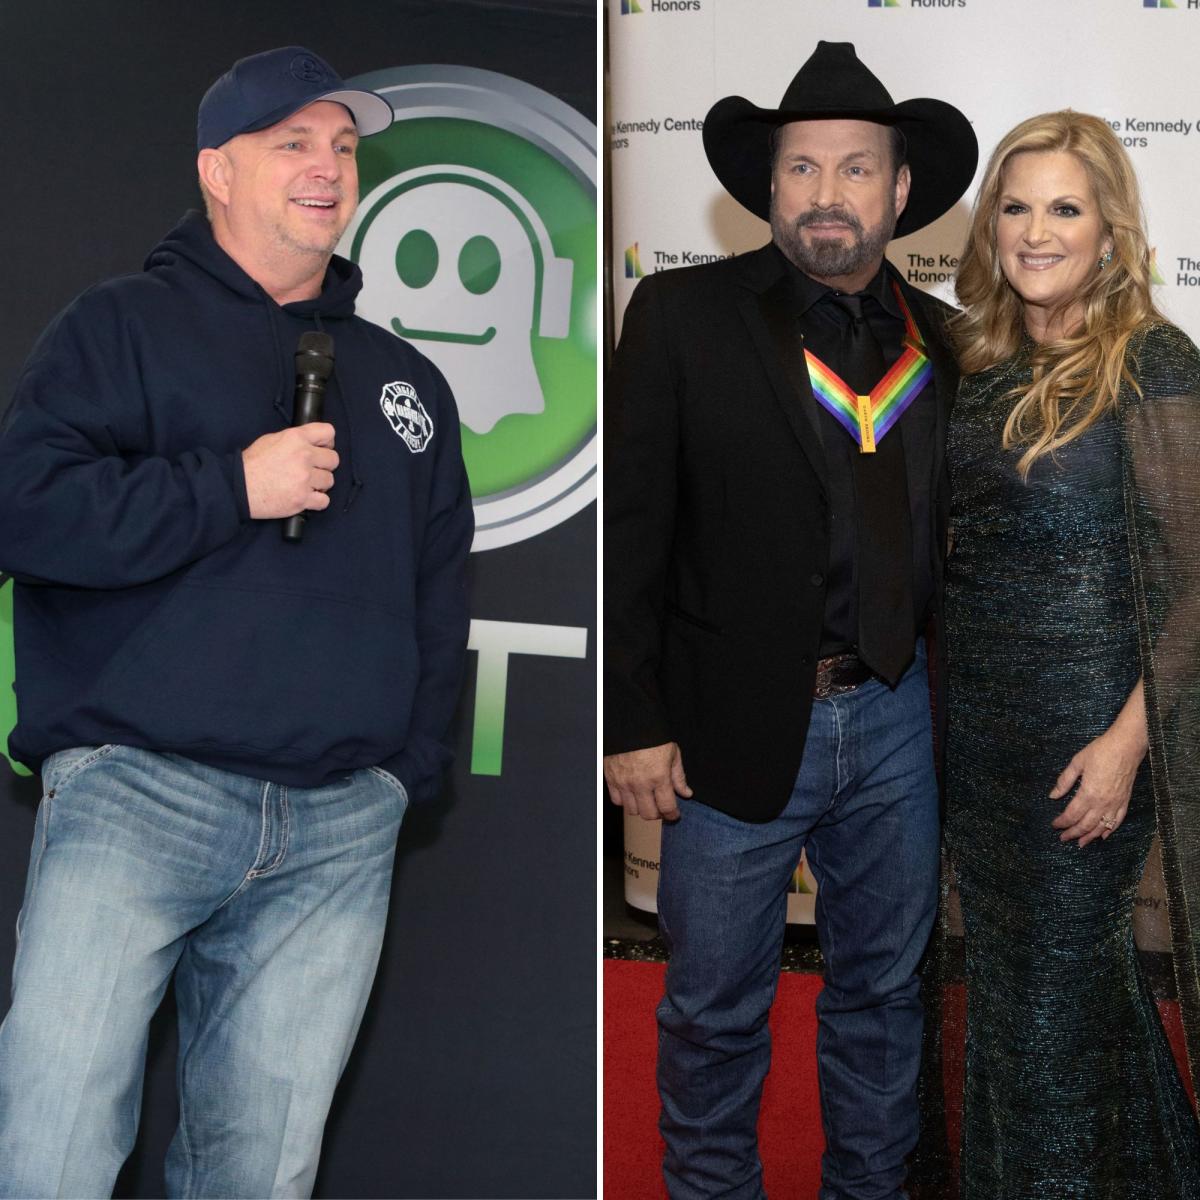 Garth Brooks’ Weight Loss Photos What to Know About His Fitness